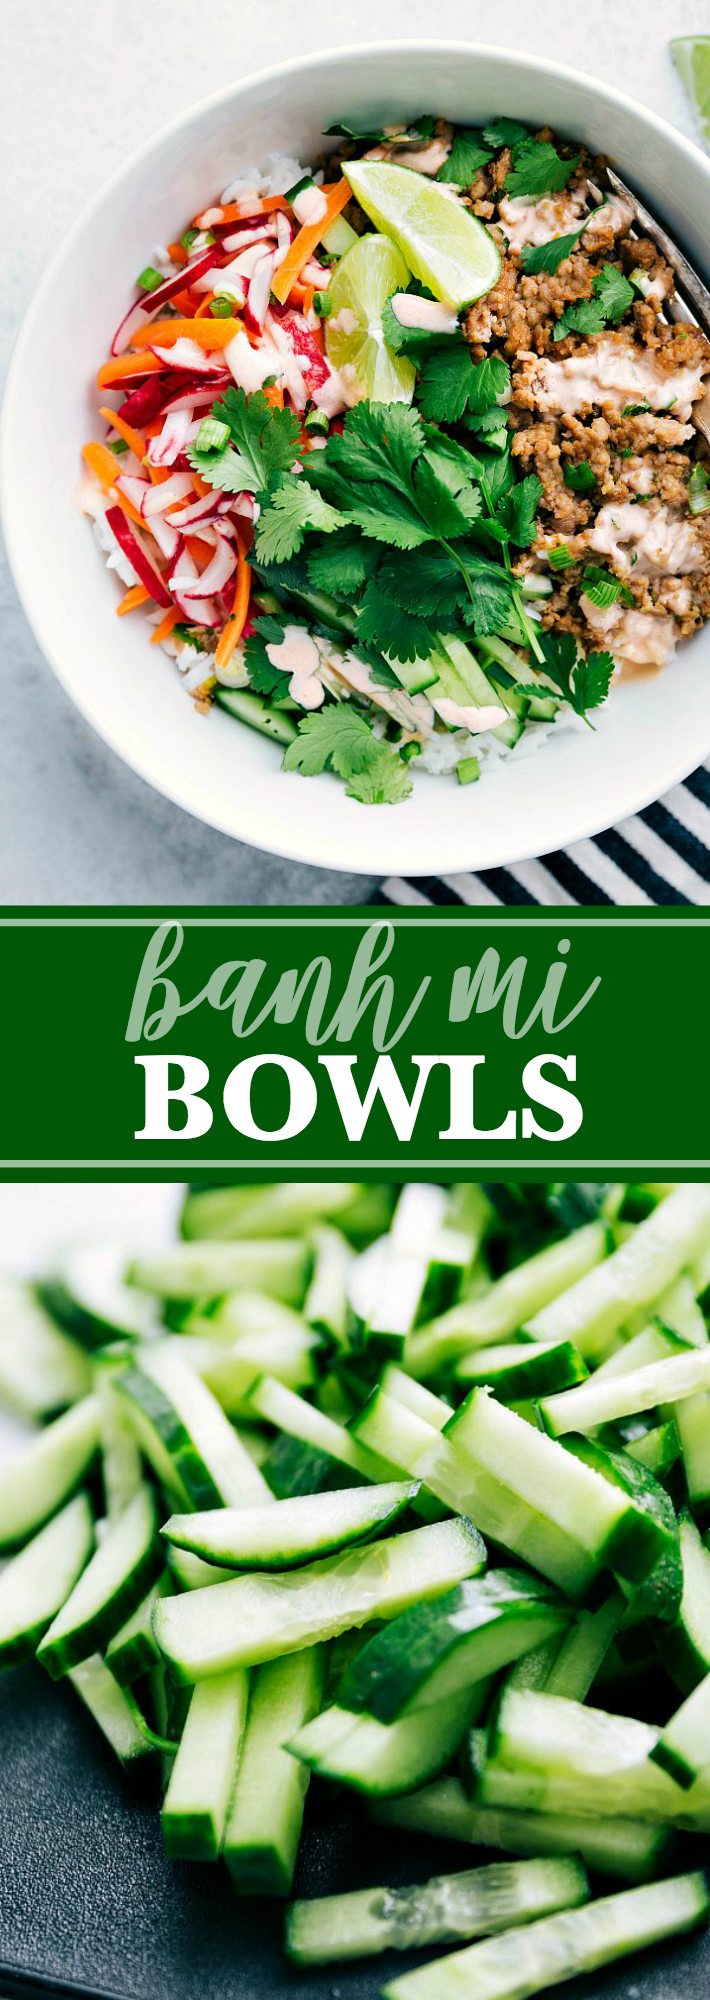 The beloved Vietnamese Banh Mi in simple bowl form. Easy to make, packed with nutrition, and delicious! via chelseasmessyapron.com #bowl #healthy #pork #easy #quick #dinner #pickled #radish #carrot #banh #mi #Vietnamese #sriracha #mayo #cilantro #lime #sandwich #bowl